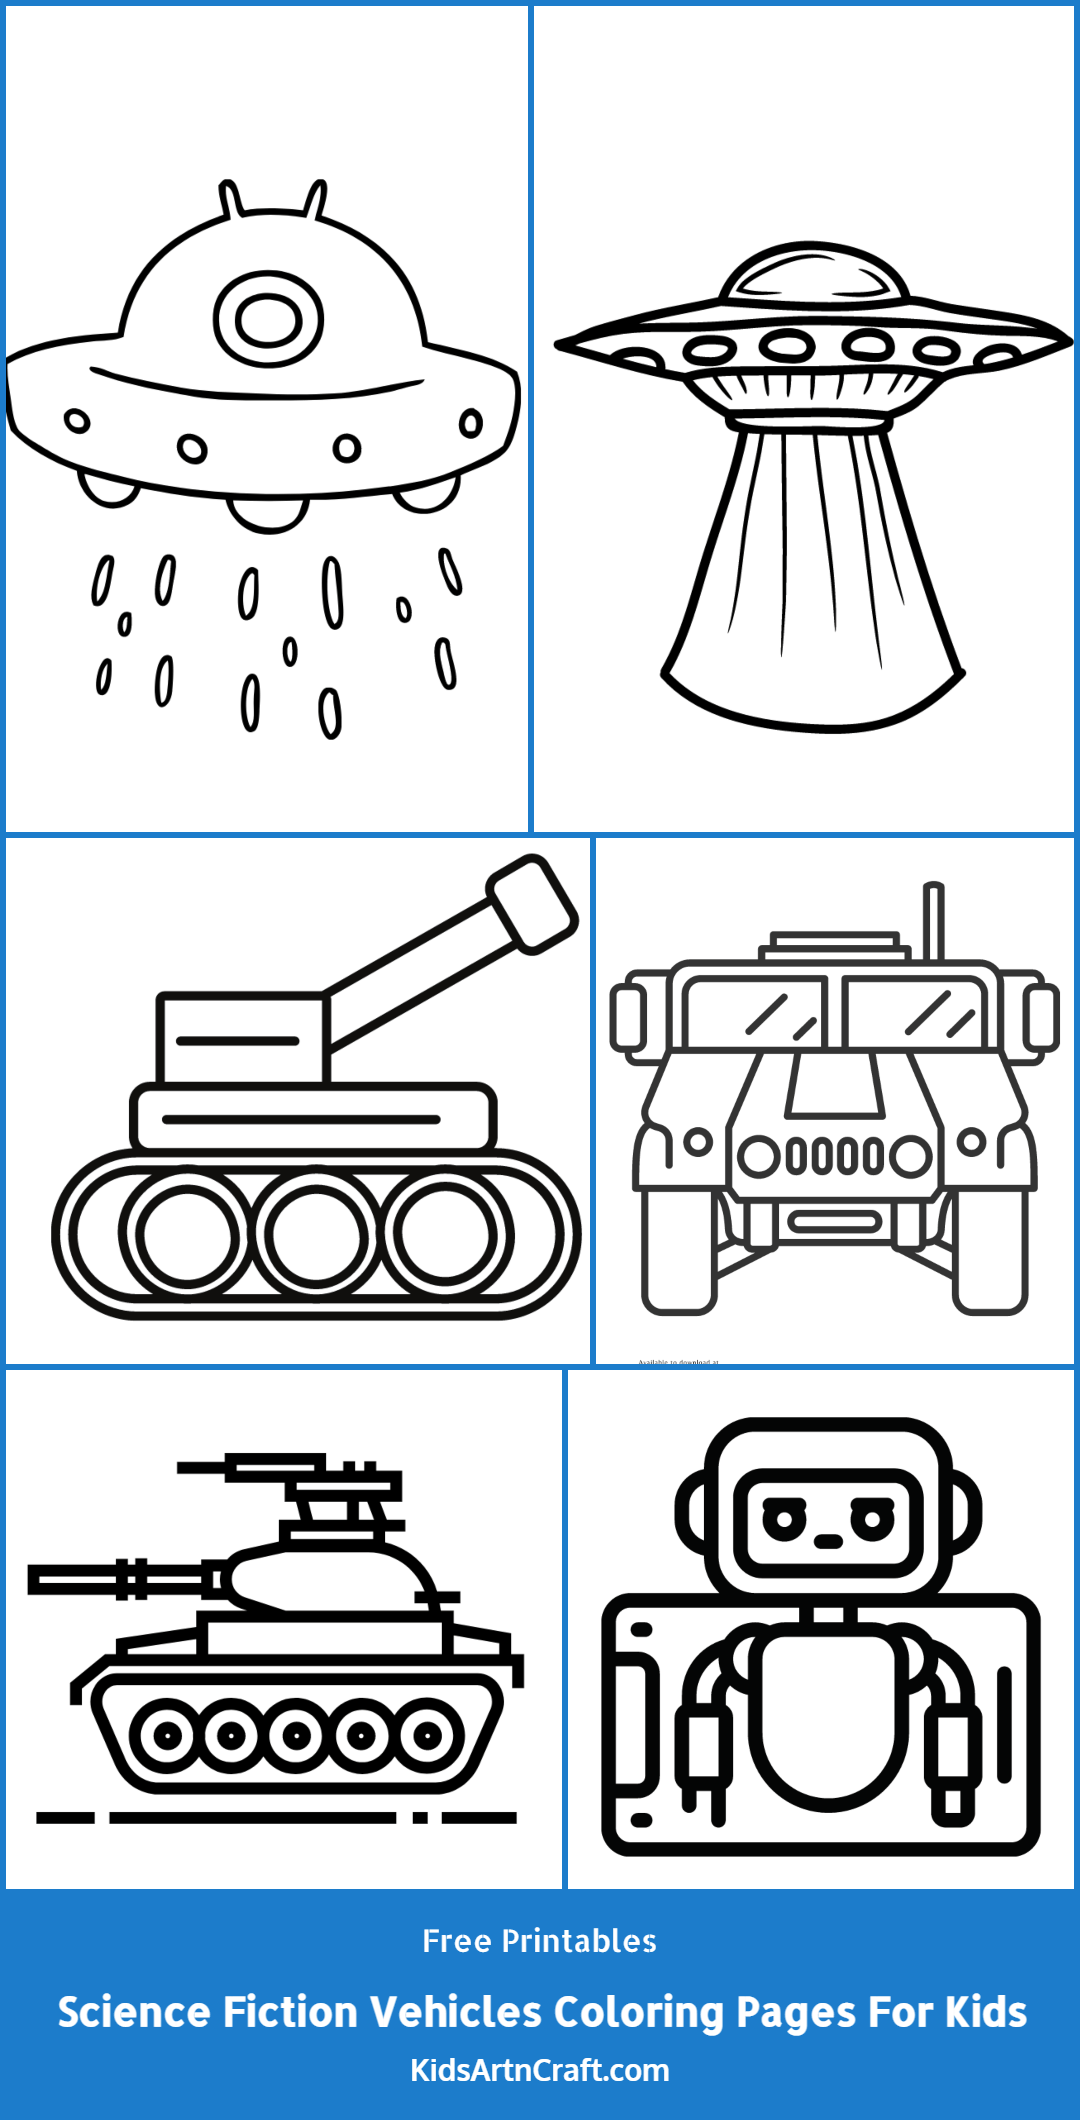 Science Fiction Vehicles Coloring Pages For Kids – Free Printables